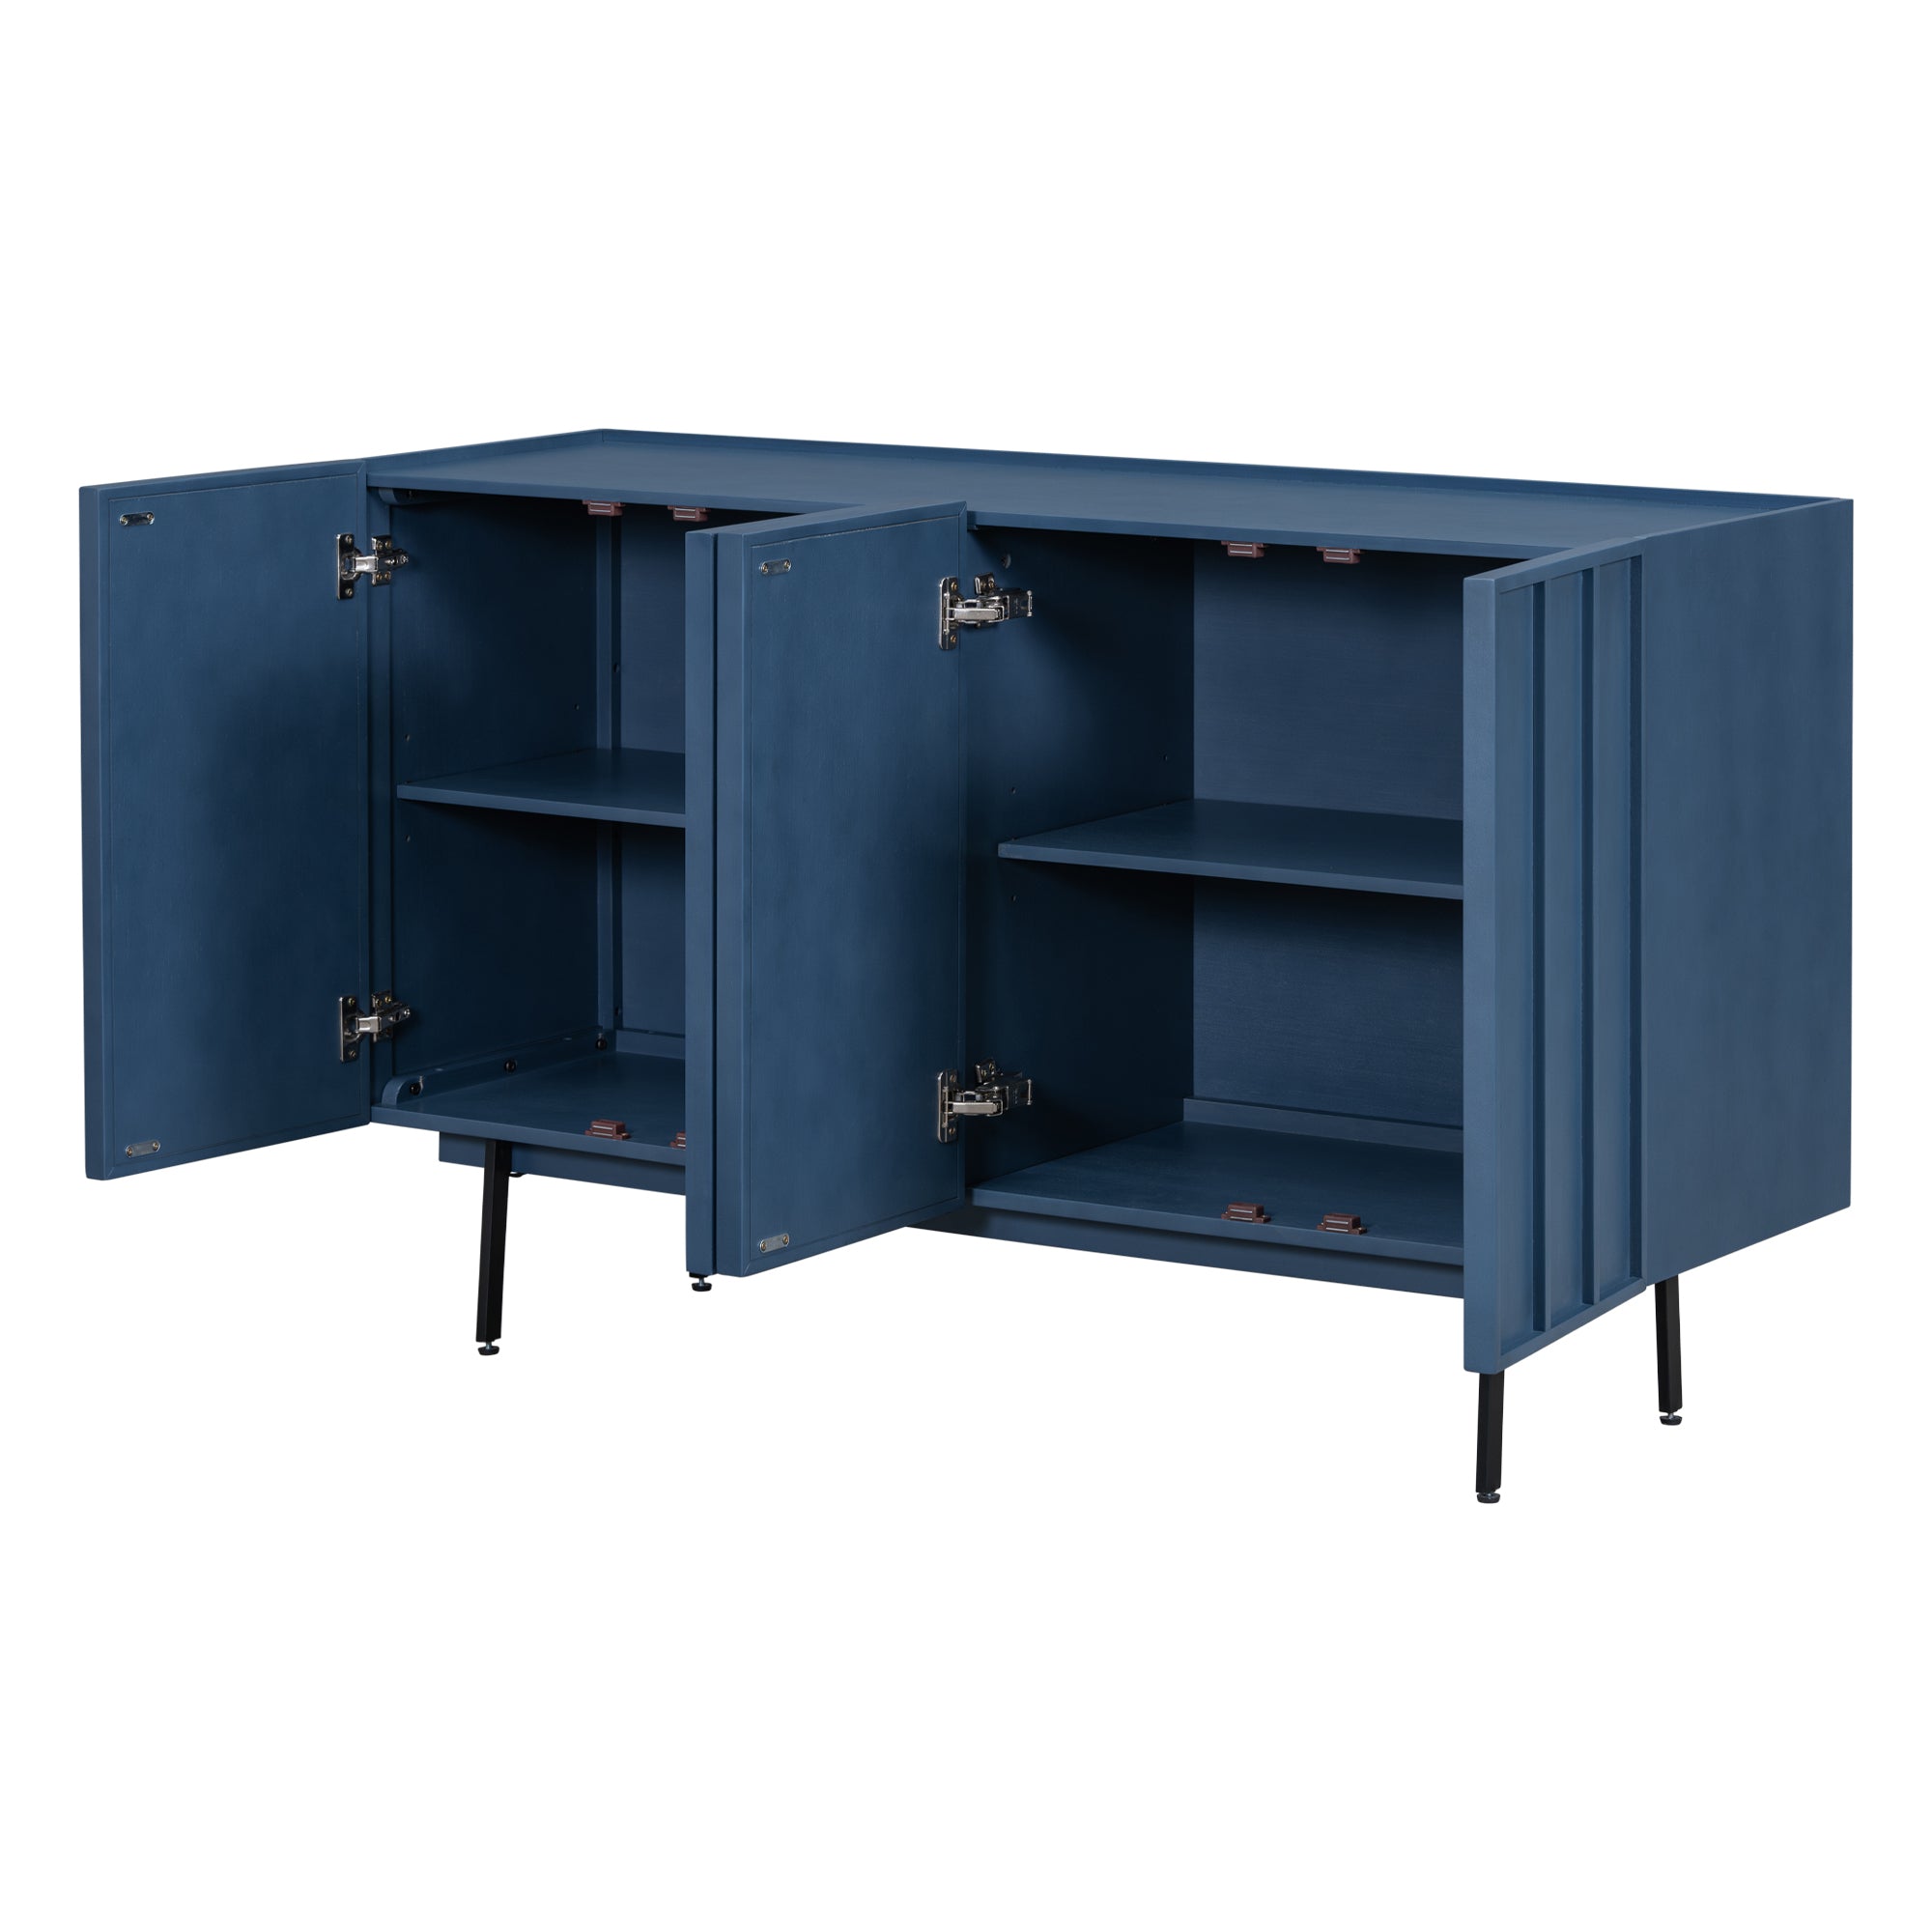 U Style Modern Cabinet with 4 Doors, Suitable for navy blue-mdf